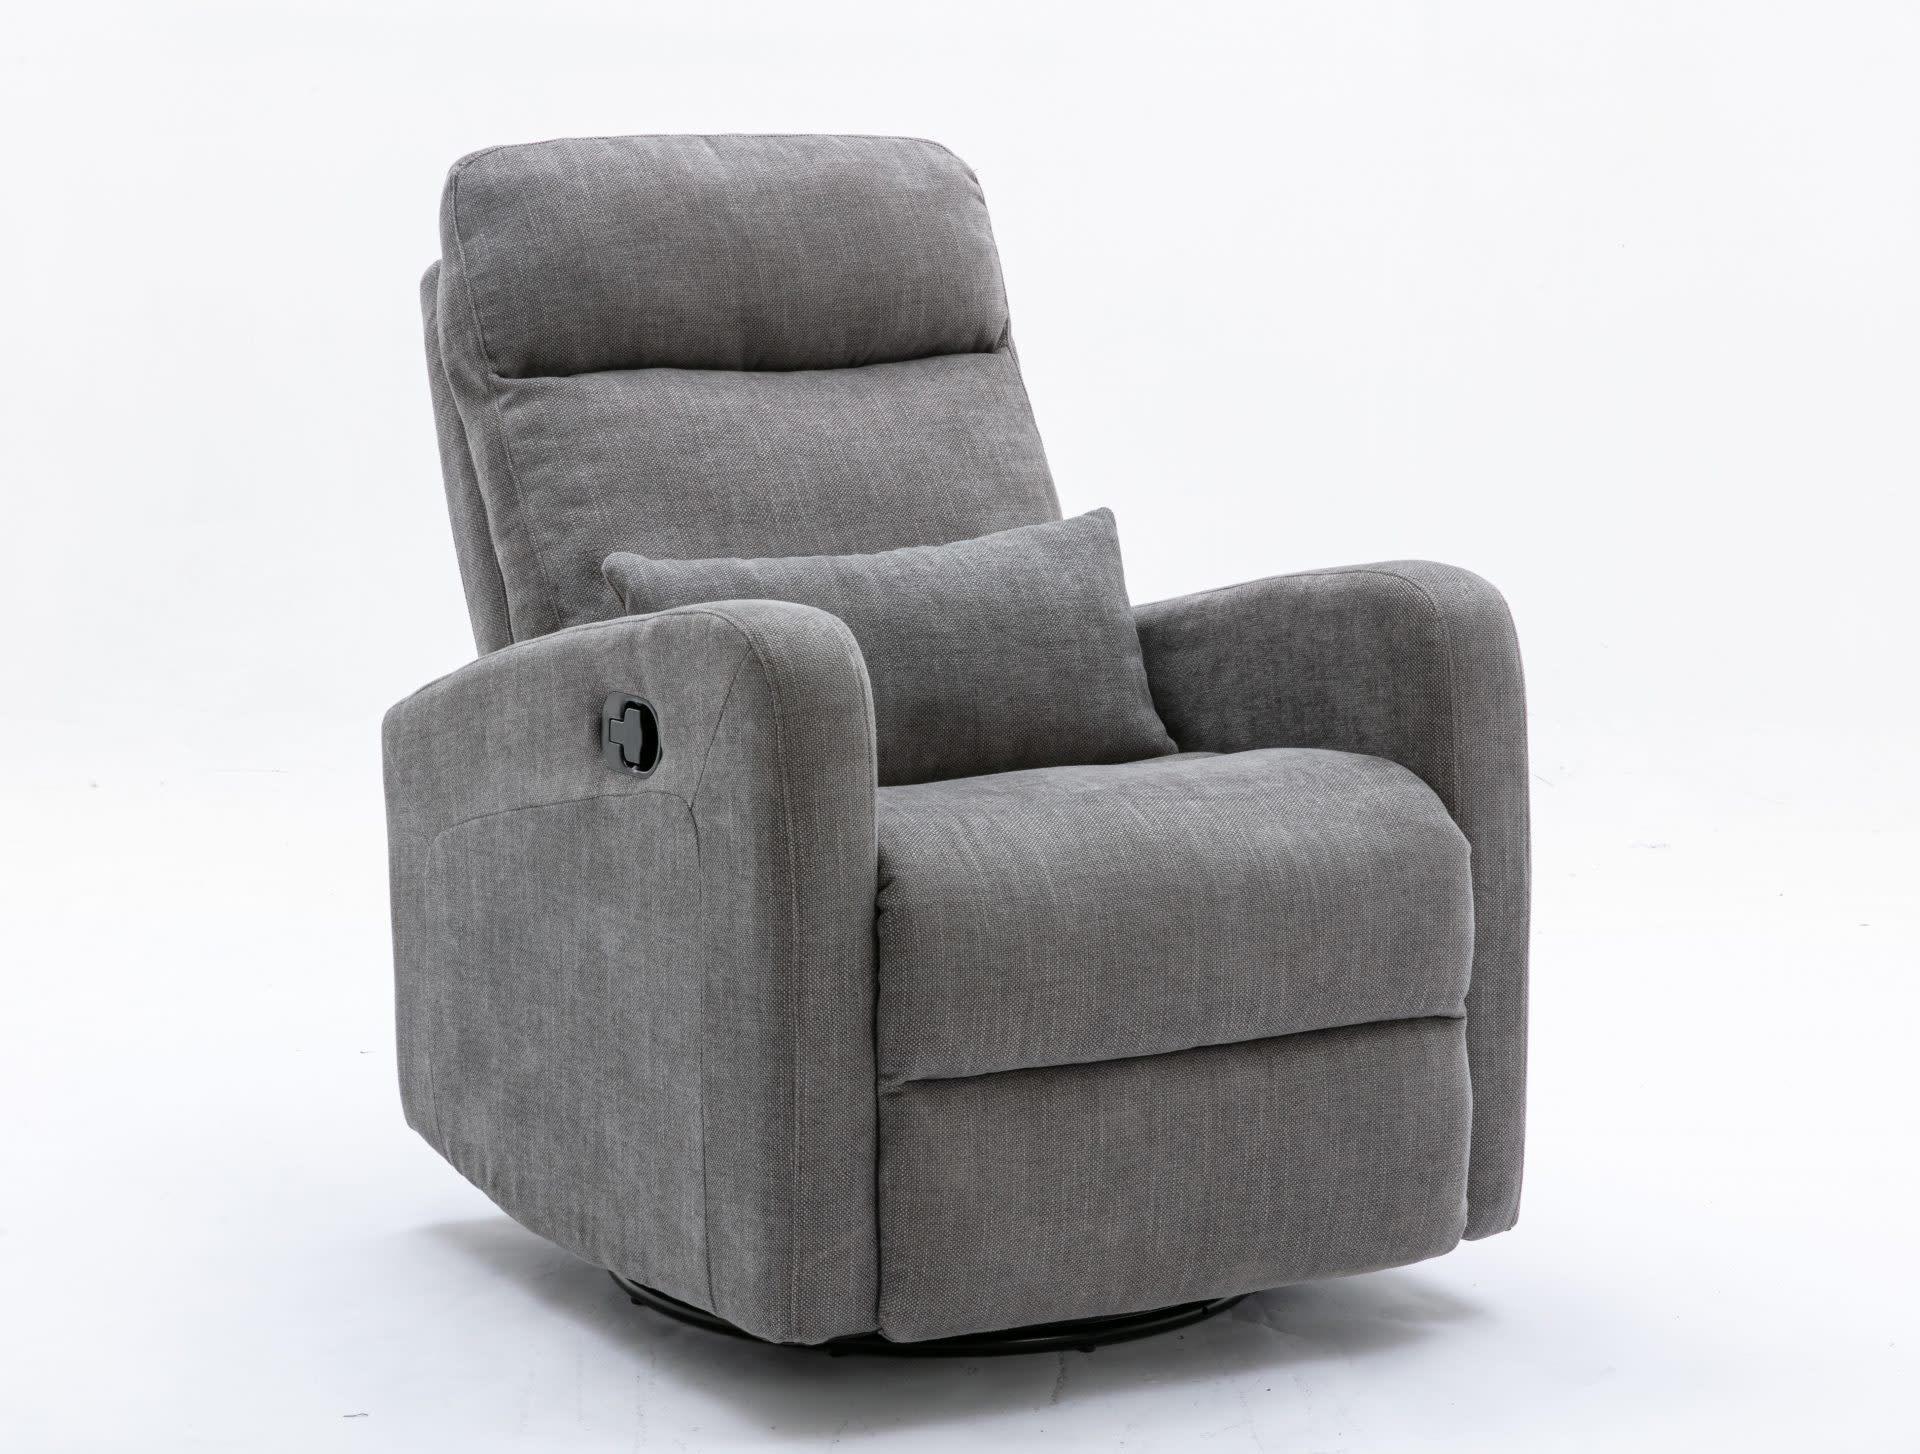 Cocoon Cocoon Plush Reclining Glider Chair Dove Grey